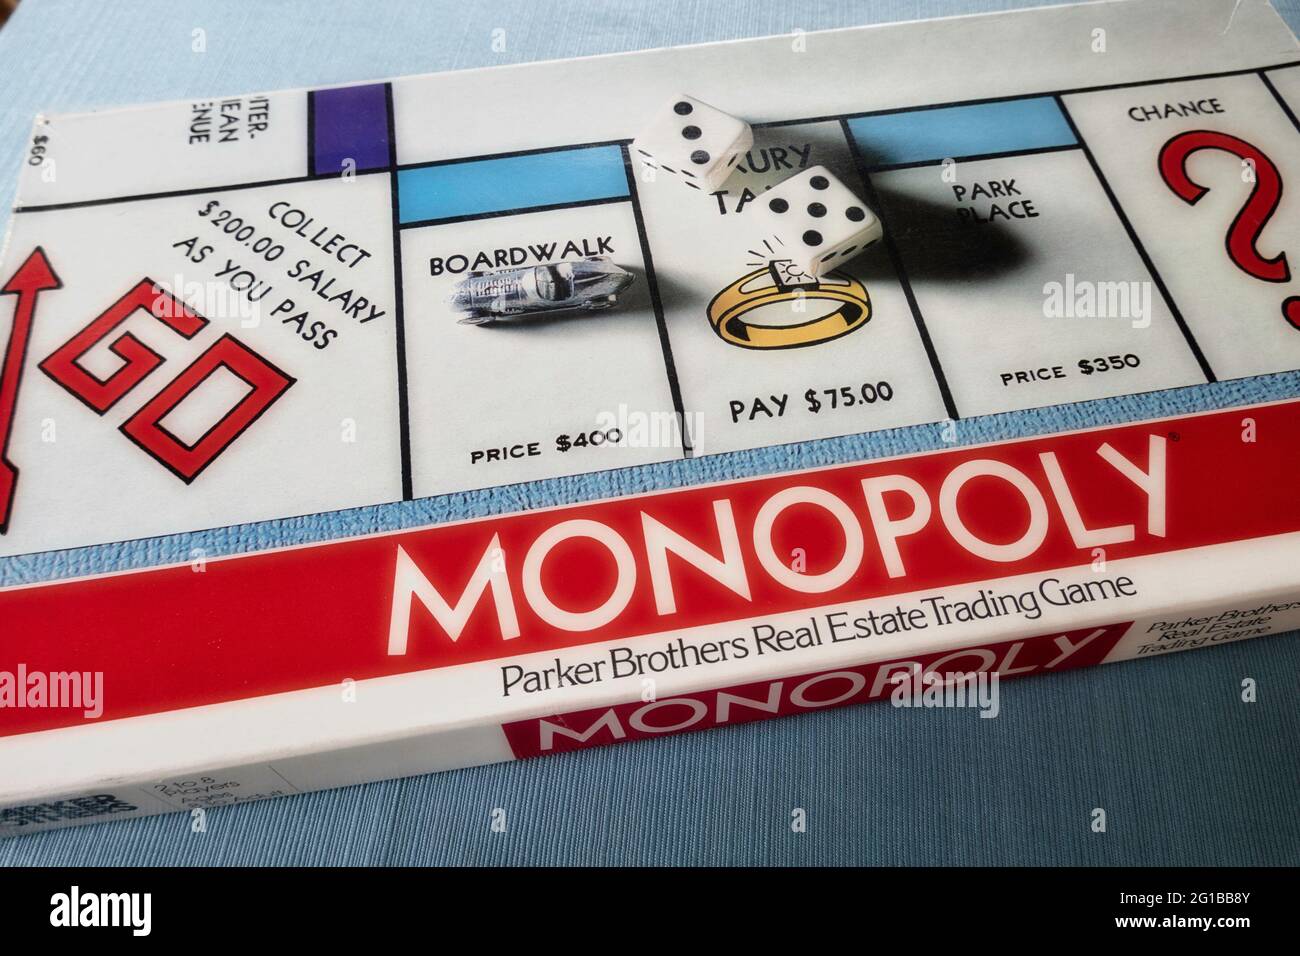 Monopoly board game is a popular international real estate trading game,  USA Stock Photo - Alamy